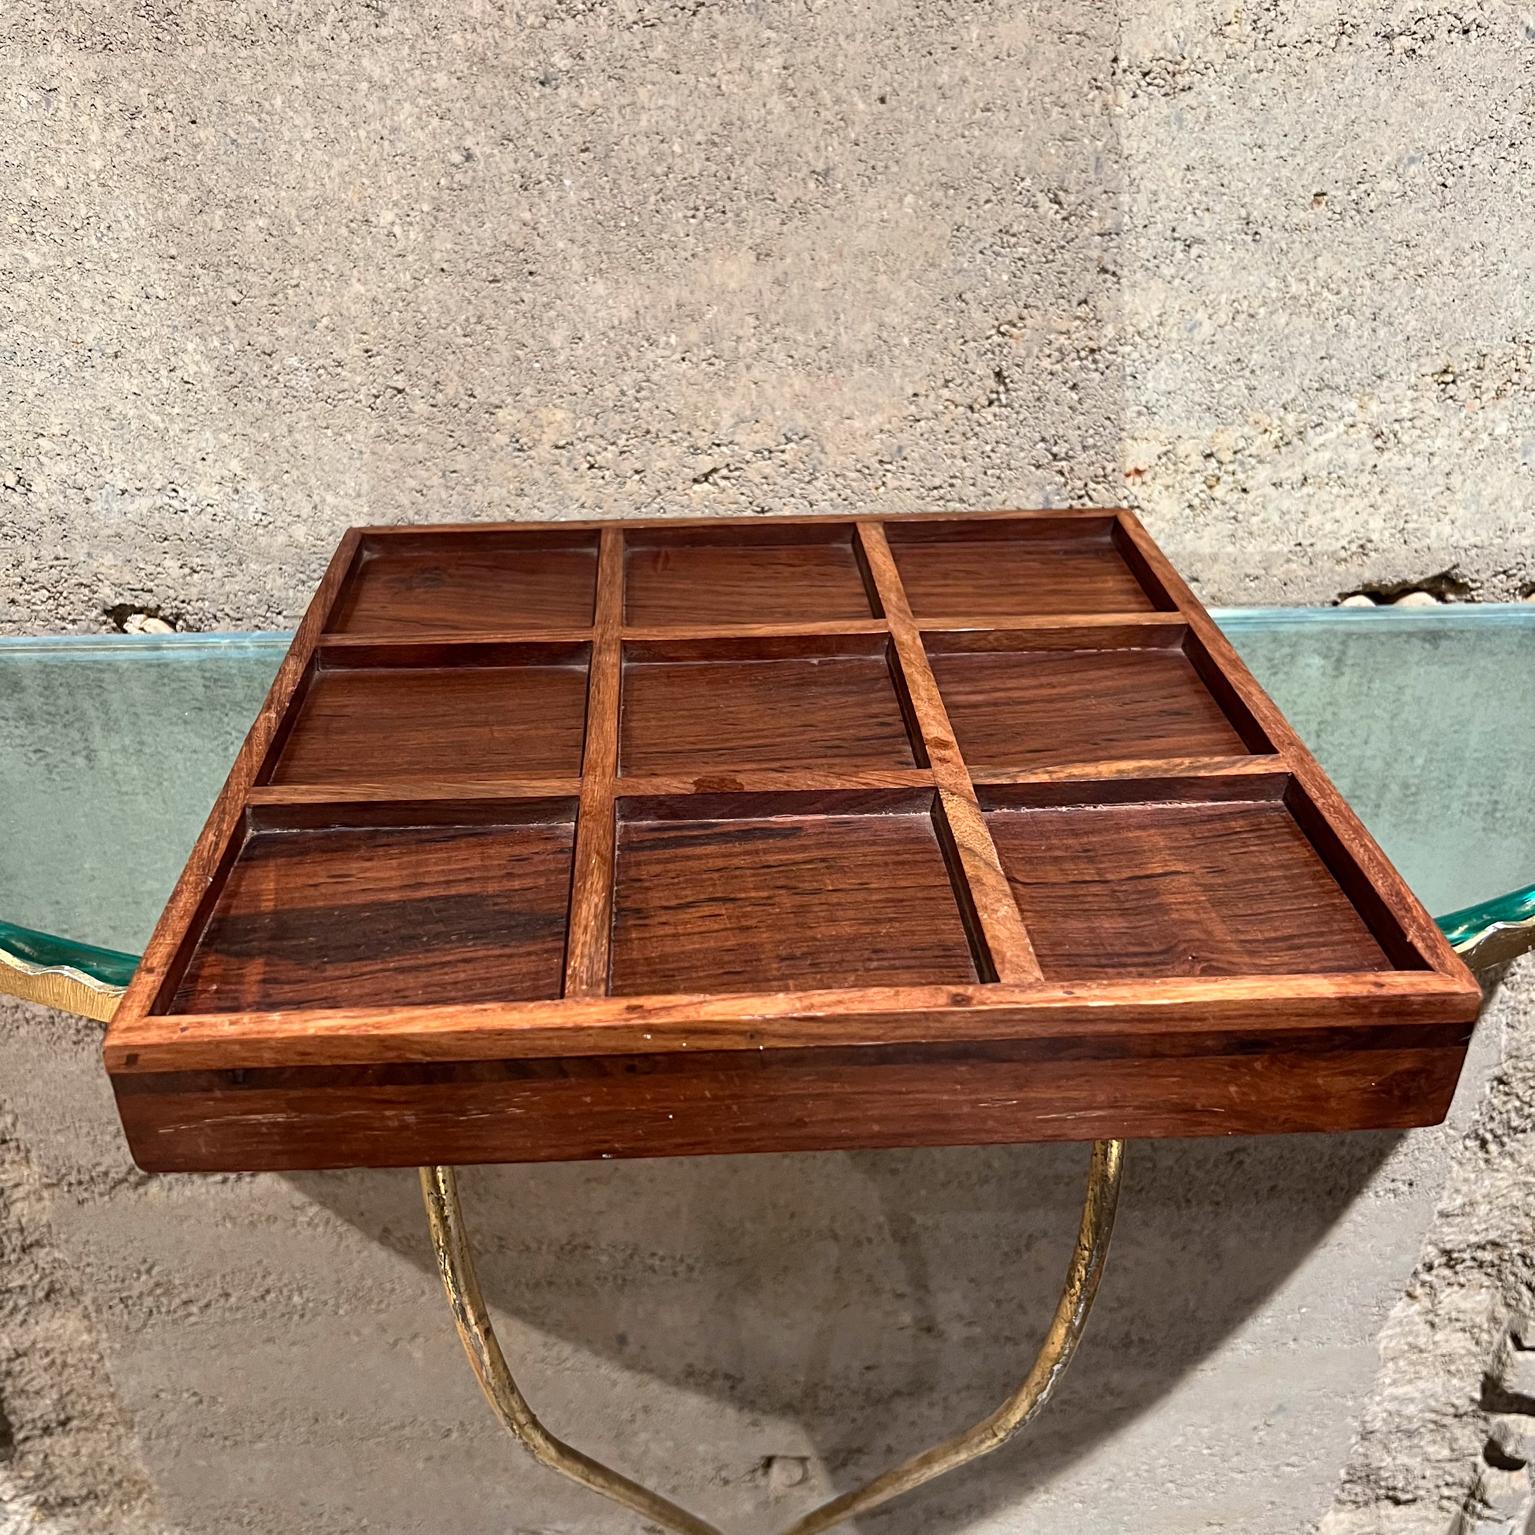 Vintage Sectioned Tray in Rosewood
Tic Tac Toe Board
1.88 h x 12 x 12
Preowned vintage unrestored condition, please see images provided.